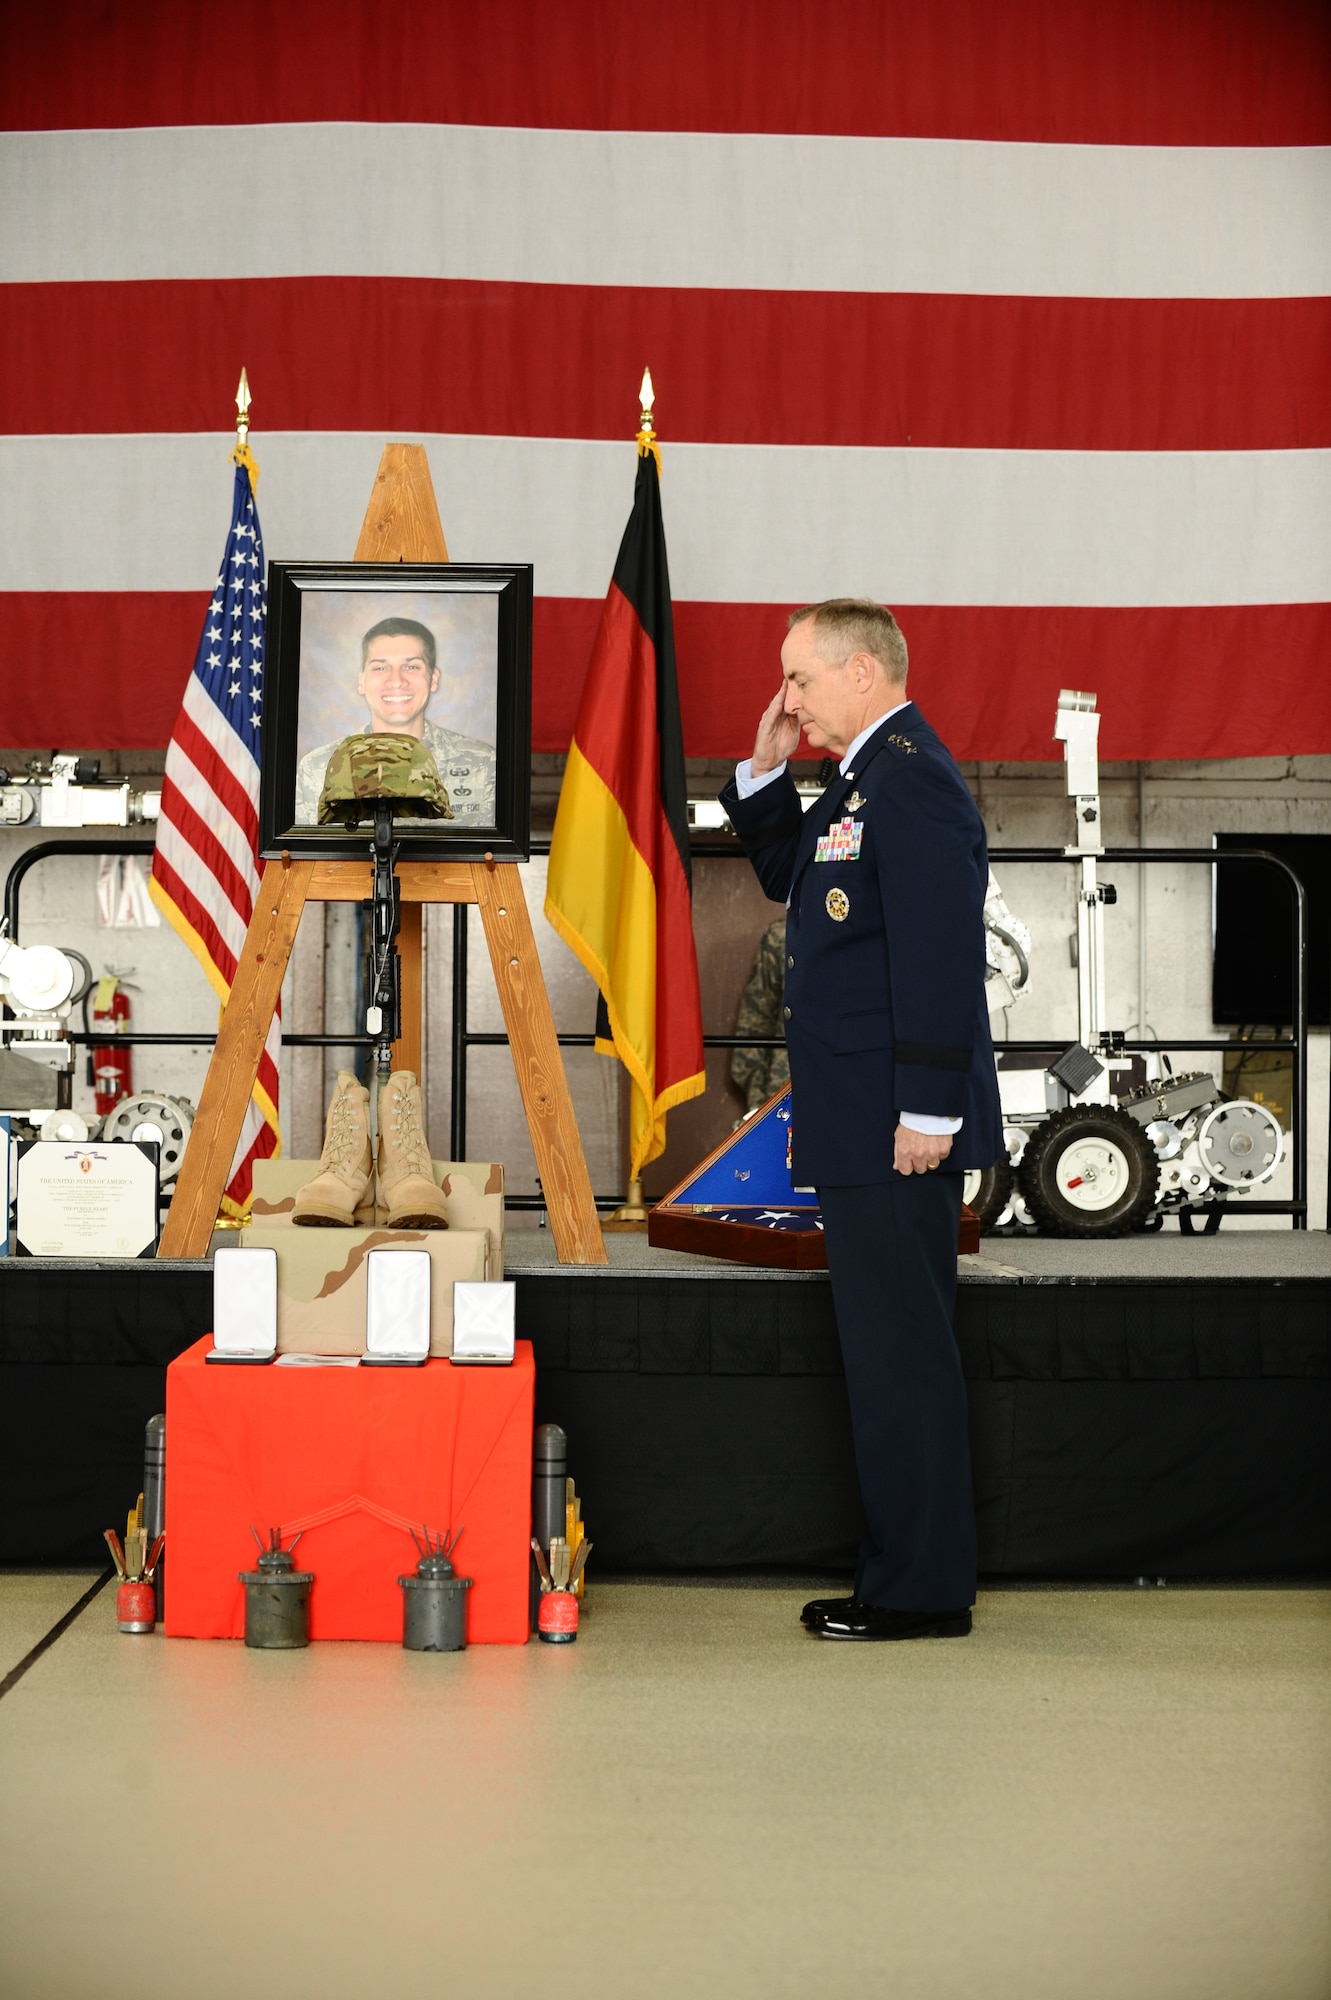 SPANGDAHLEM AIR BASE, Germany – Gen. Mark A. Welsh III, U.S. Air Forces in Europe commander, salutes the Fallen Airman Memorial of Staff Sgt. Joseph J. Hamski, 52nd Civil Engineer Squadron Explosive Ordnance Disposal Flight, after posthumously presenting him the Bronze Star, Purple Heart and Air Force Commendation Medals during Sergeant Hamski’s memorial service here June 16. Sergeant Hamski was killed in action May 26, 2011, in Shorabak, Afghanistan, while responding to a known enemy weapons cache. (U.S. Air Force photo/Senior Airman Nathanael Callon)